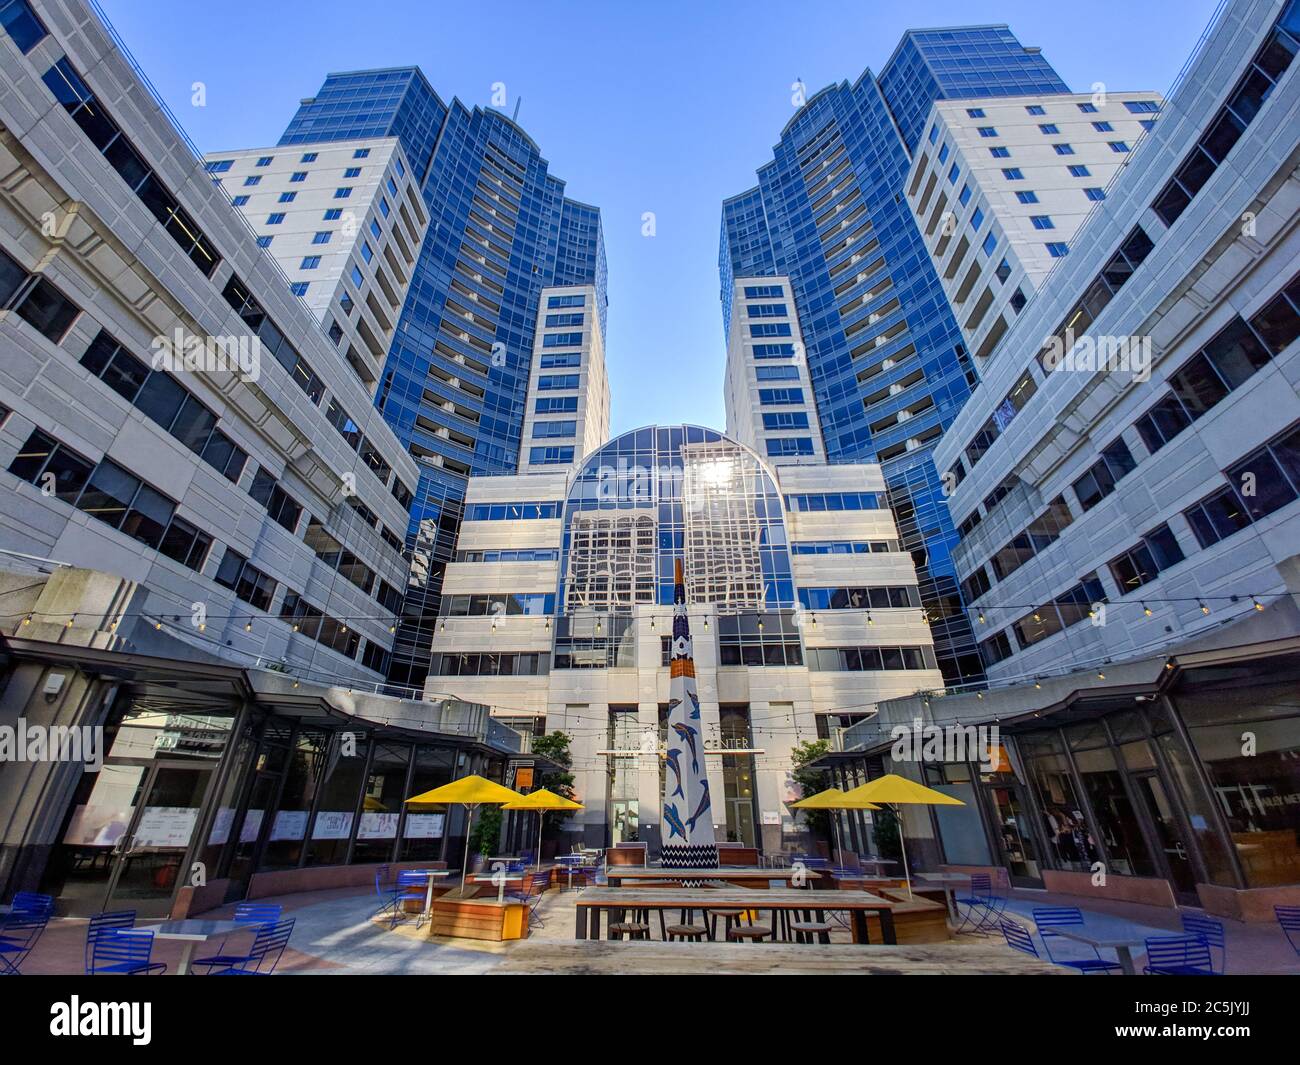 San Francisco, CA, United States - Feb 18, 2019: Google offices at Two Rincon center skyscraper tower bottom up view with blue sky Stock Photo